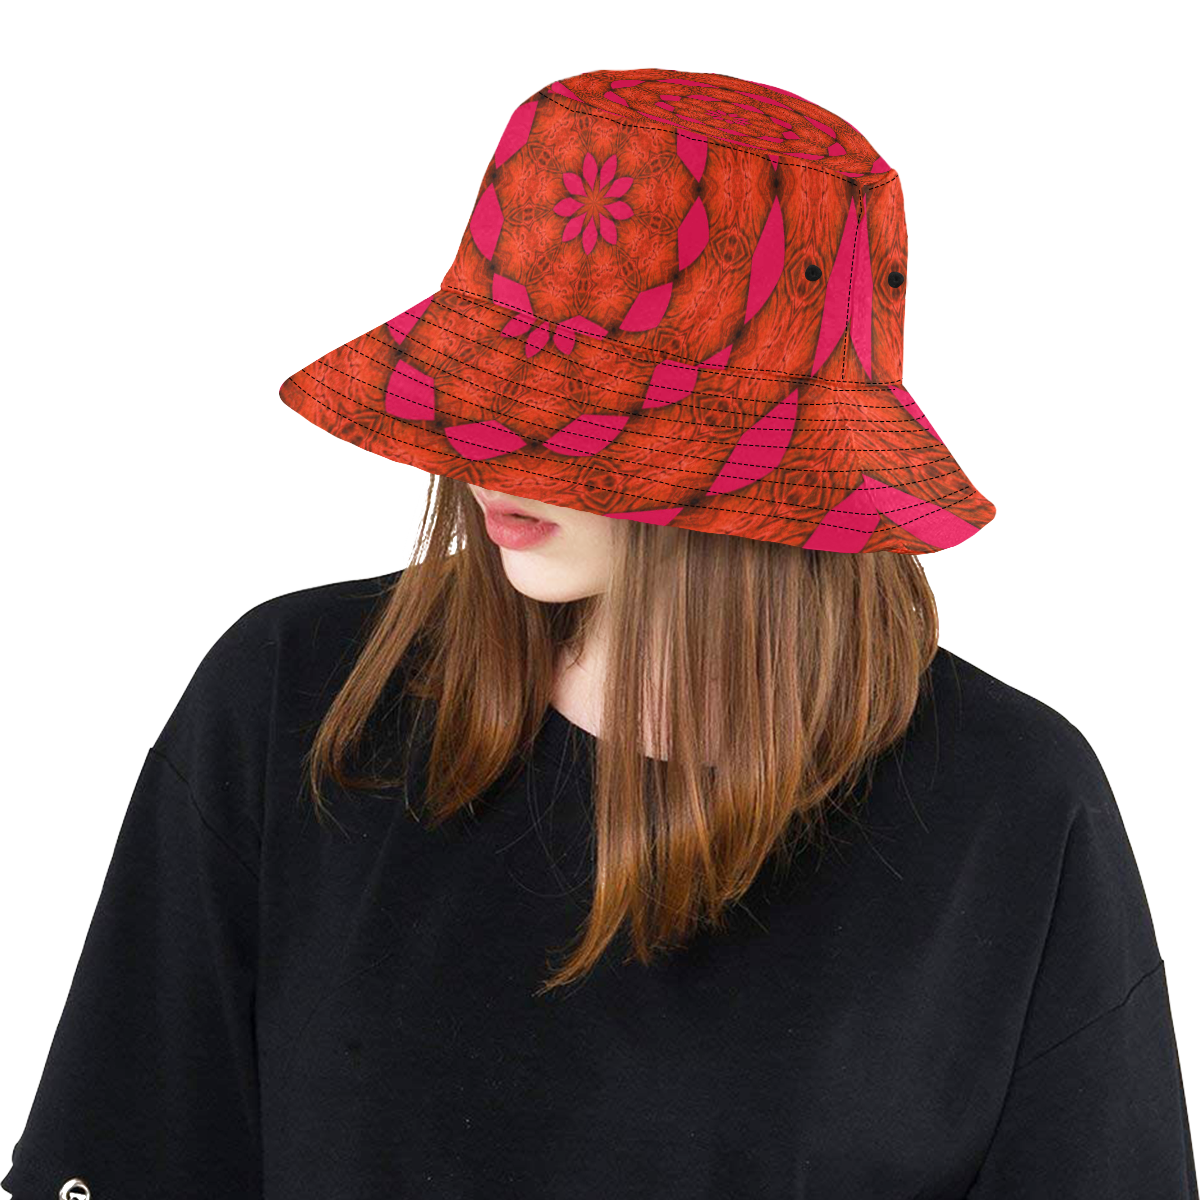 Atomic Pink All Over Print Bucket Hat